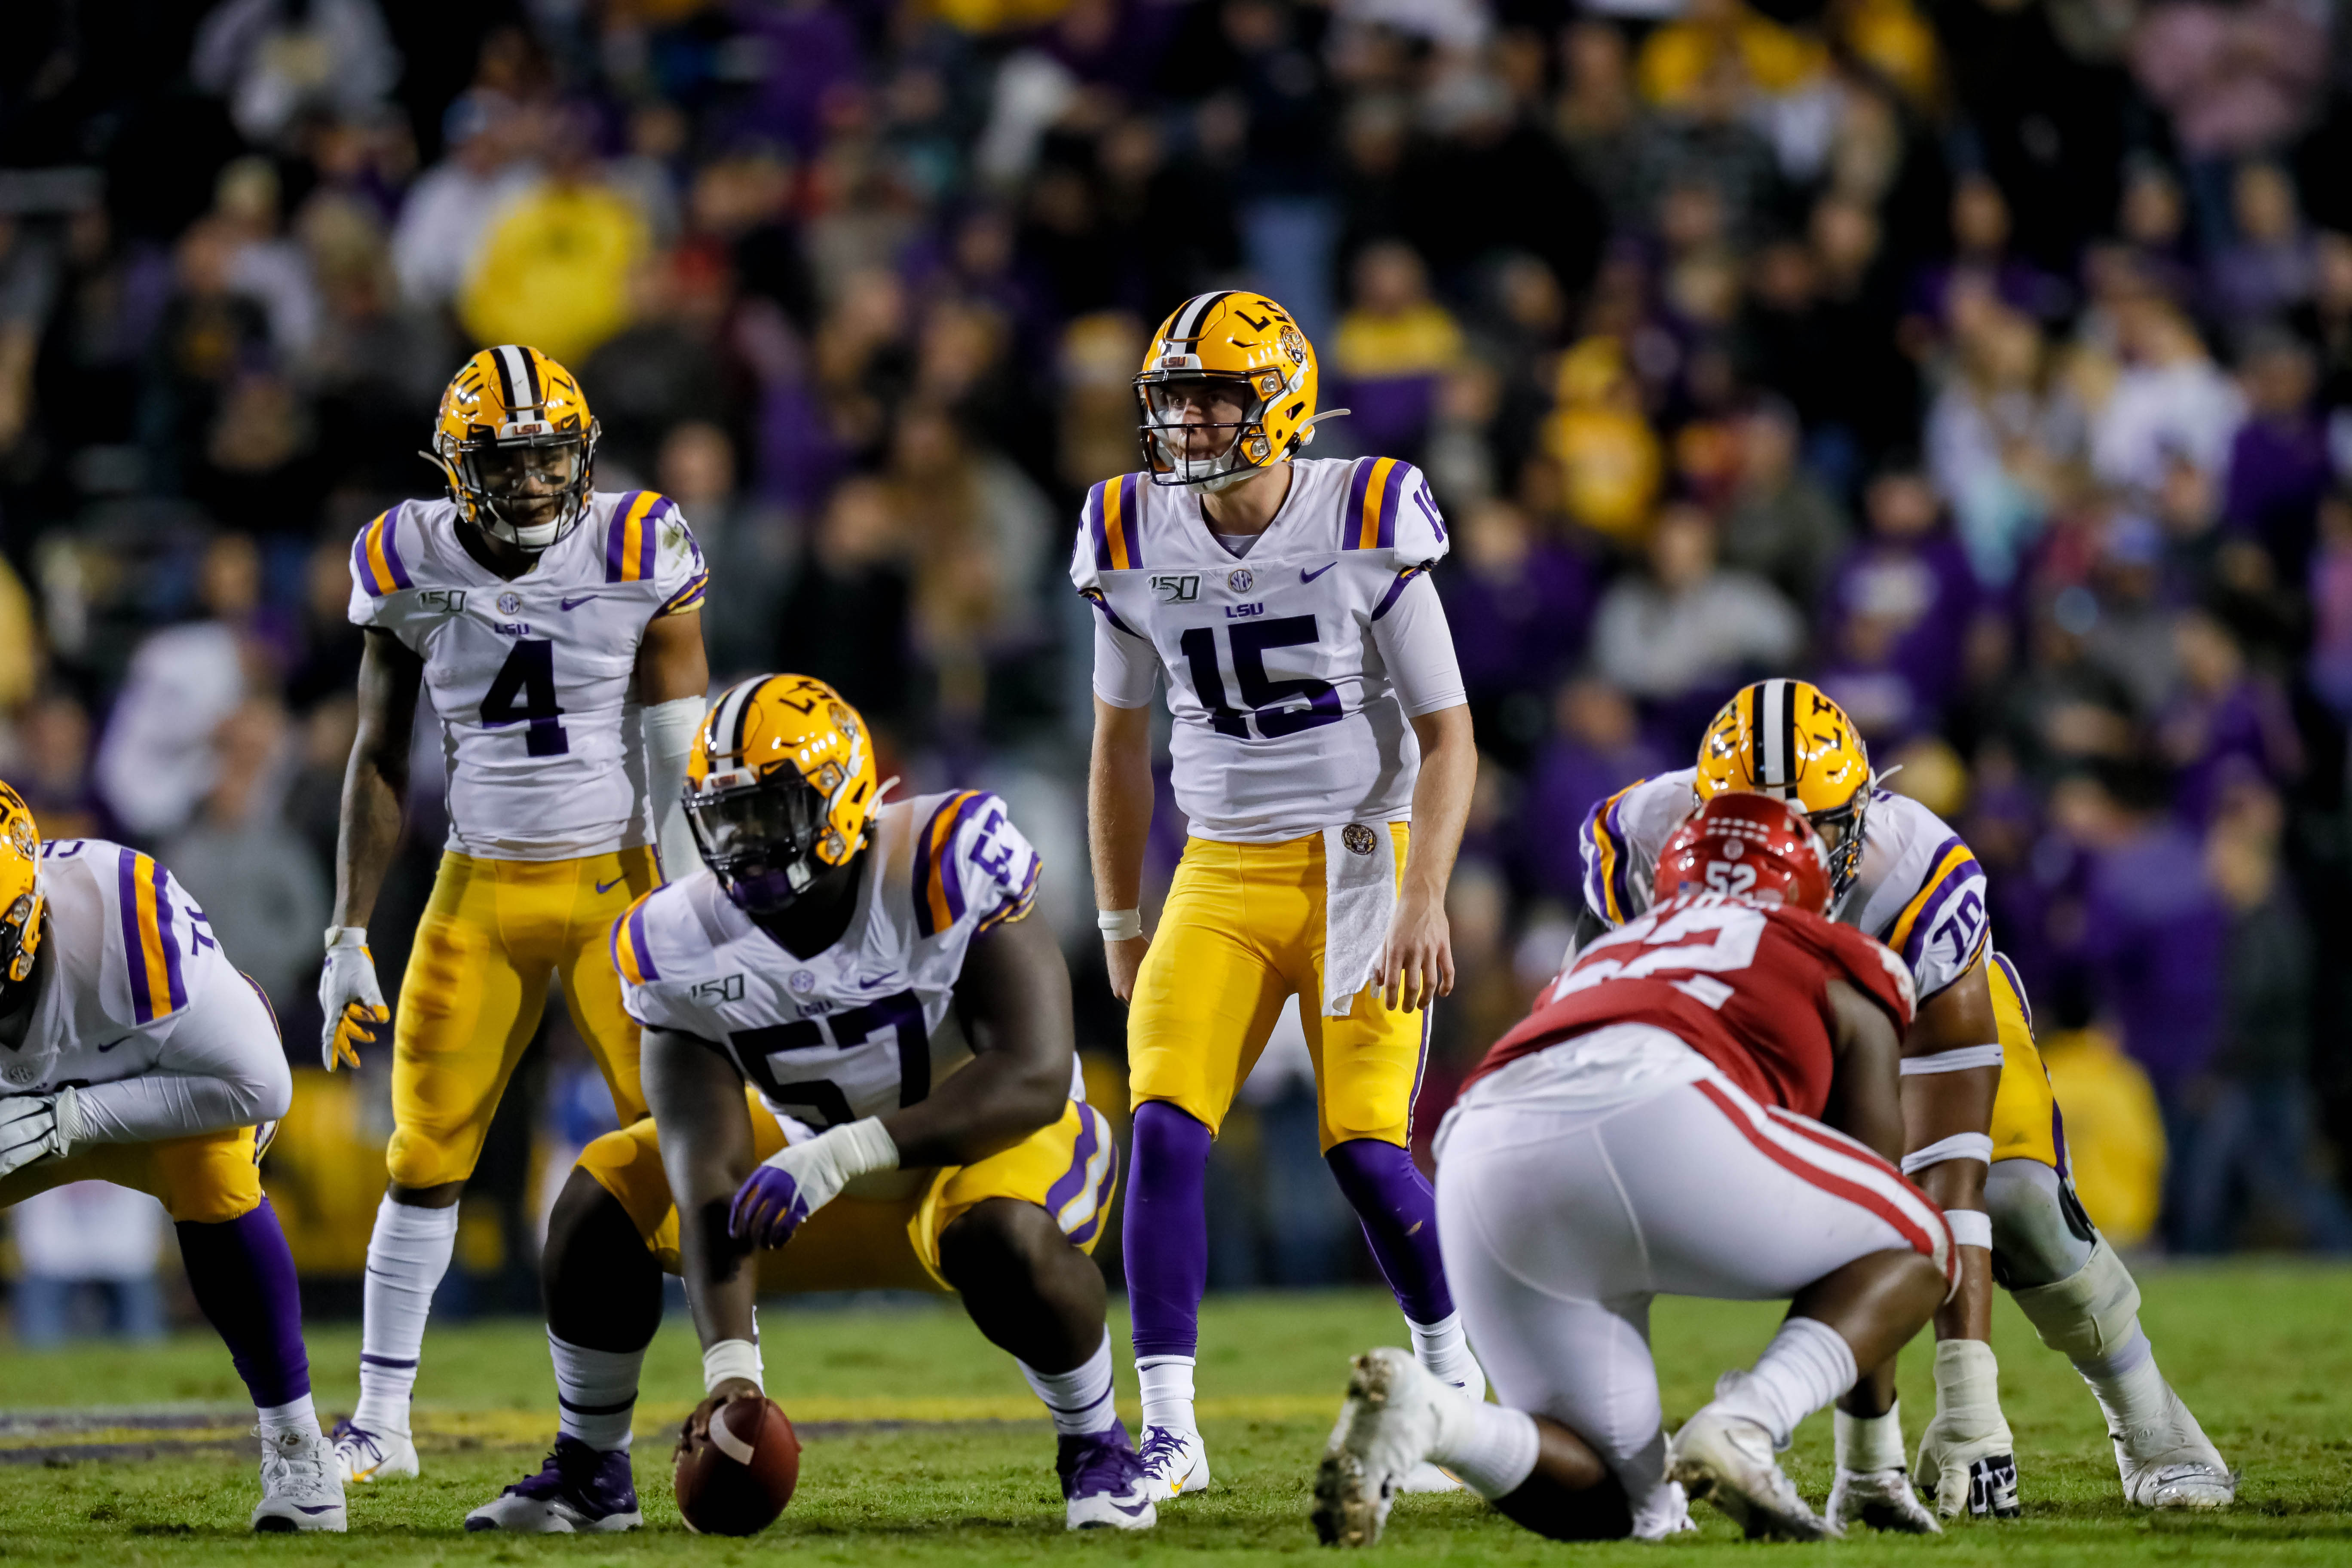 LSU Football Schedule Ranked Fourth Toughest Nationally by ESPN FPI